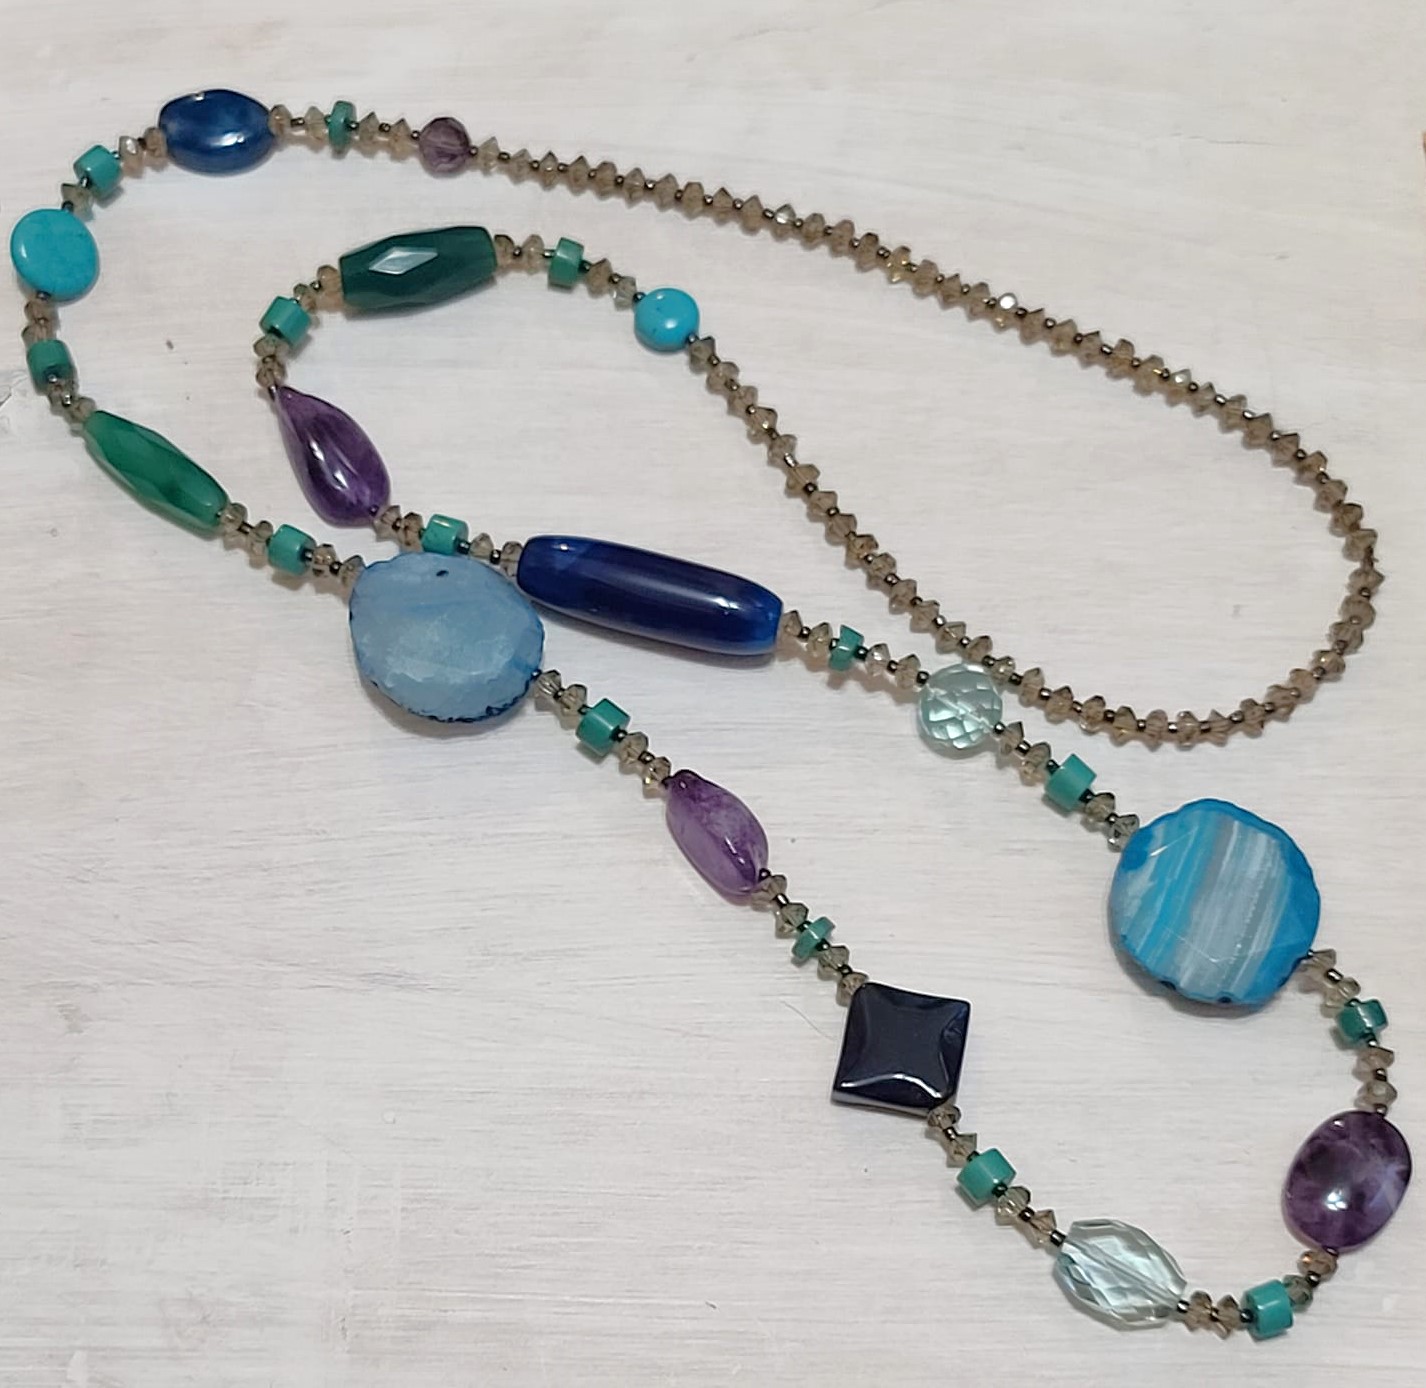 Blue Agate, Amethyst,Turquoise & Glass Bead Necklace 37"